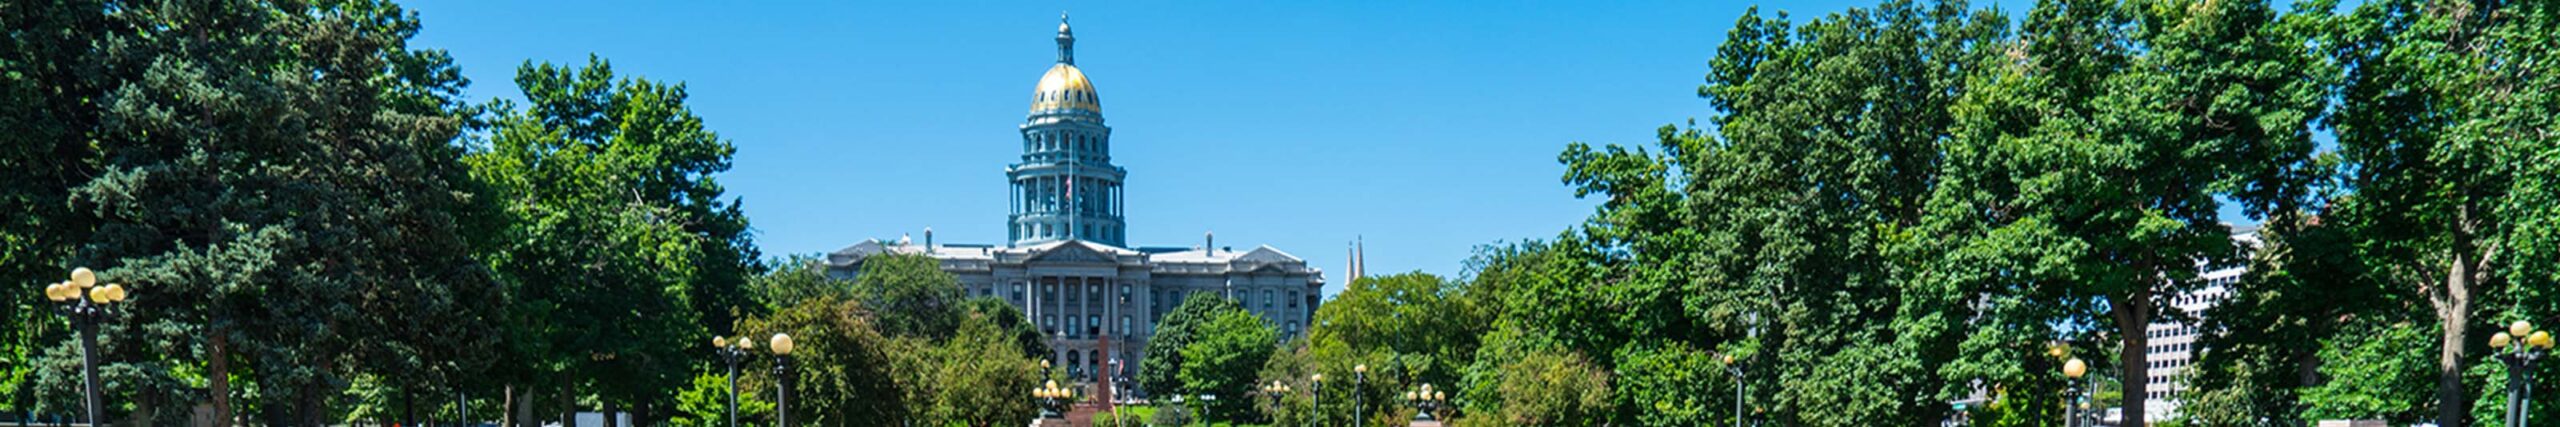 SLG Header for Our Team page showing the Denver Capitol building in Spring